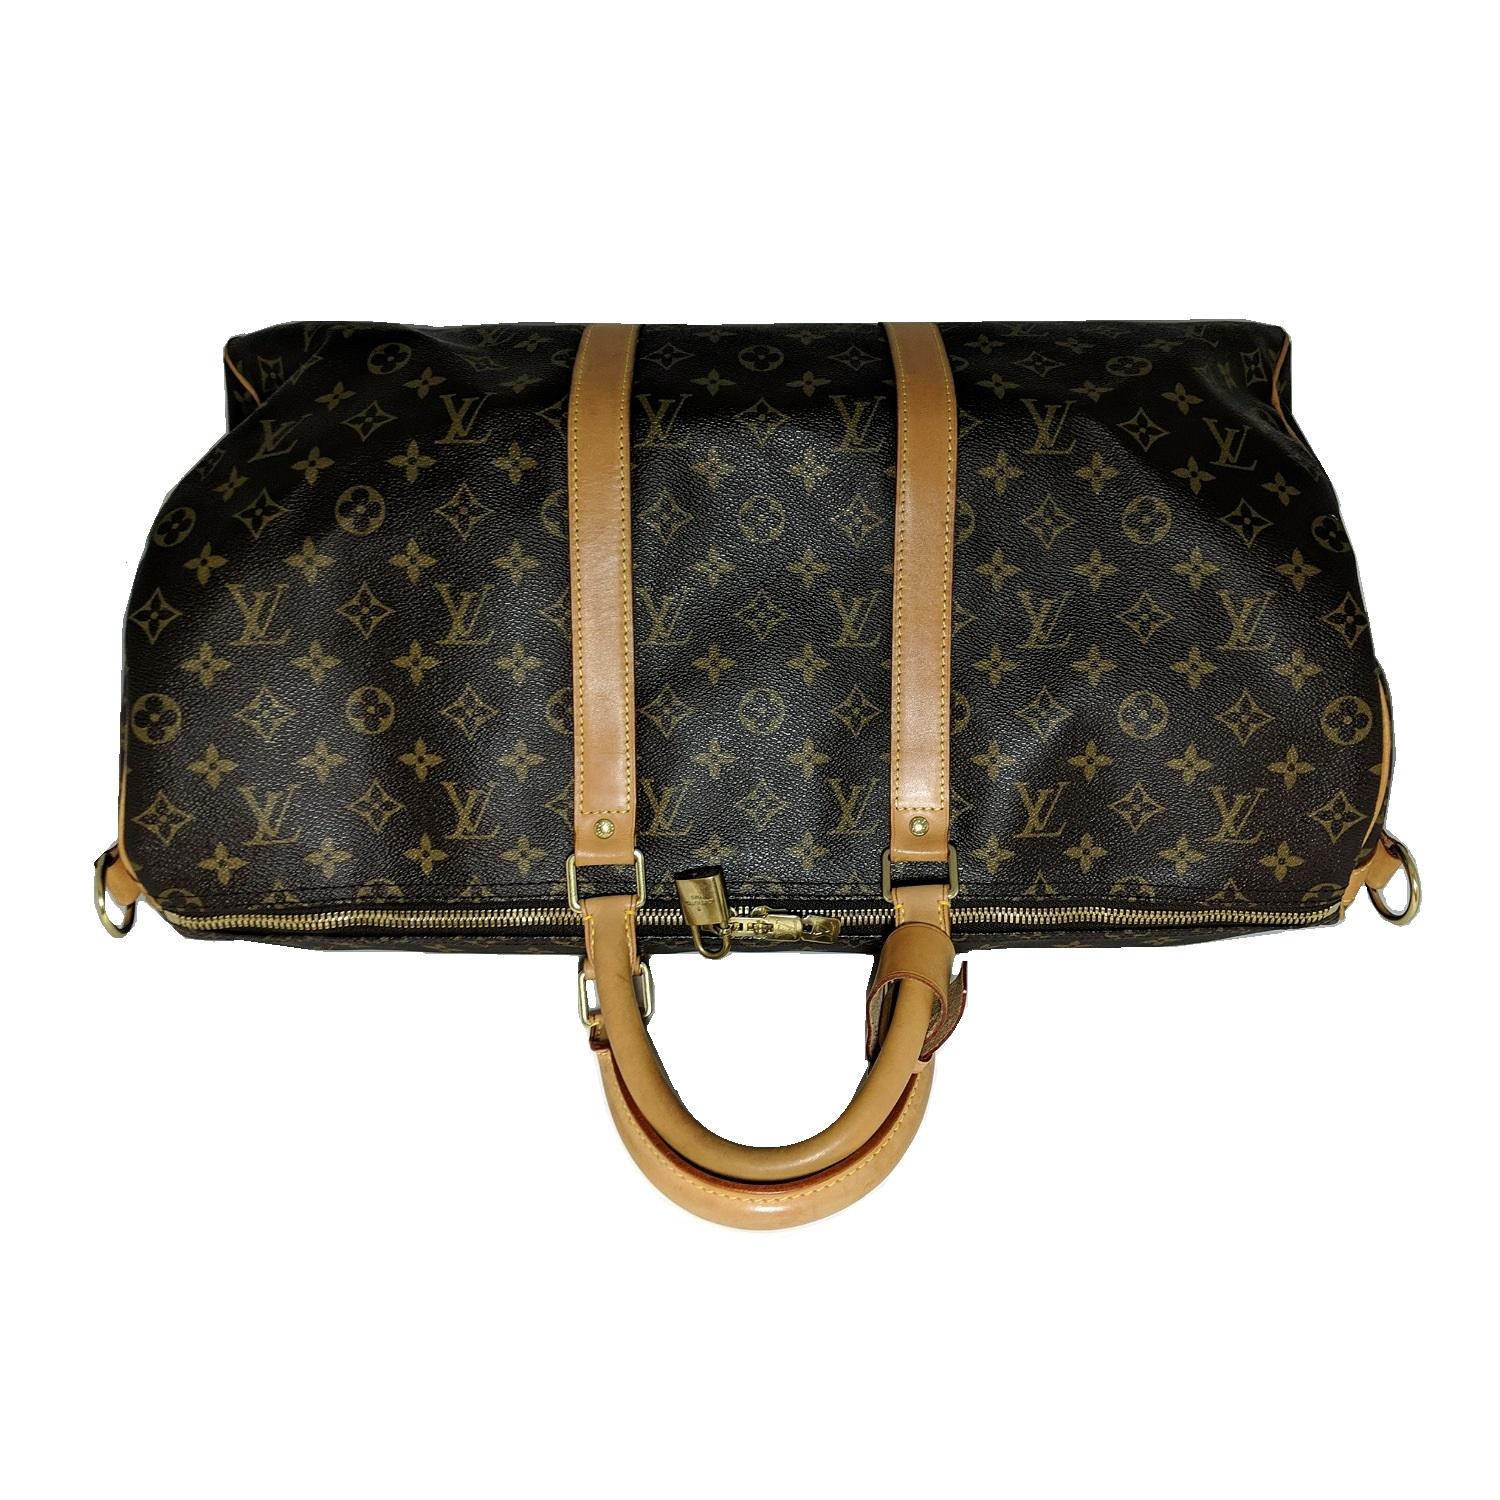 Louis Vuitton Monogram Canvas Keepall Bandouliere 50 Luggage 1